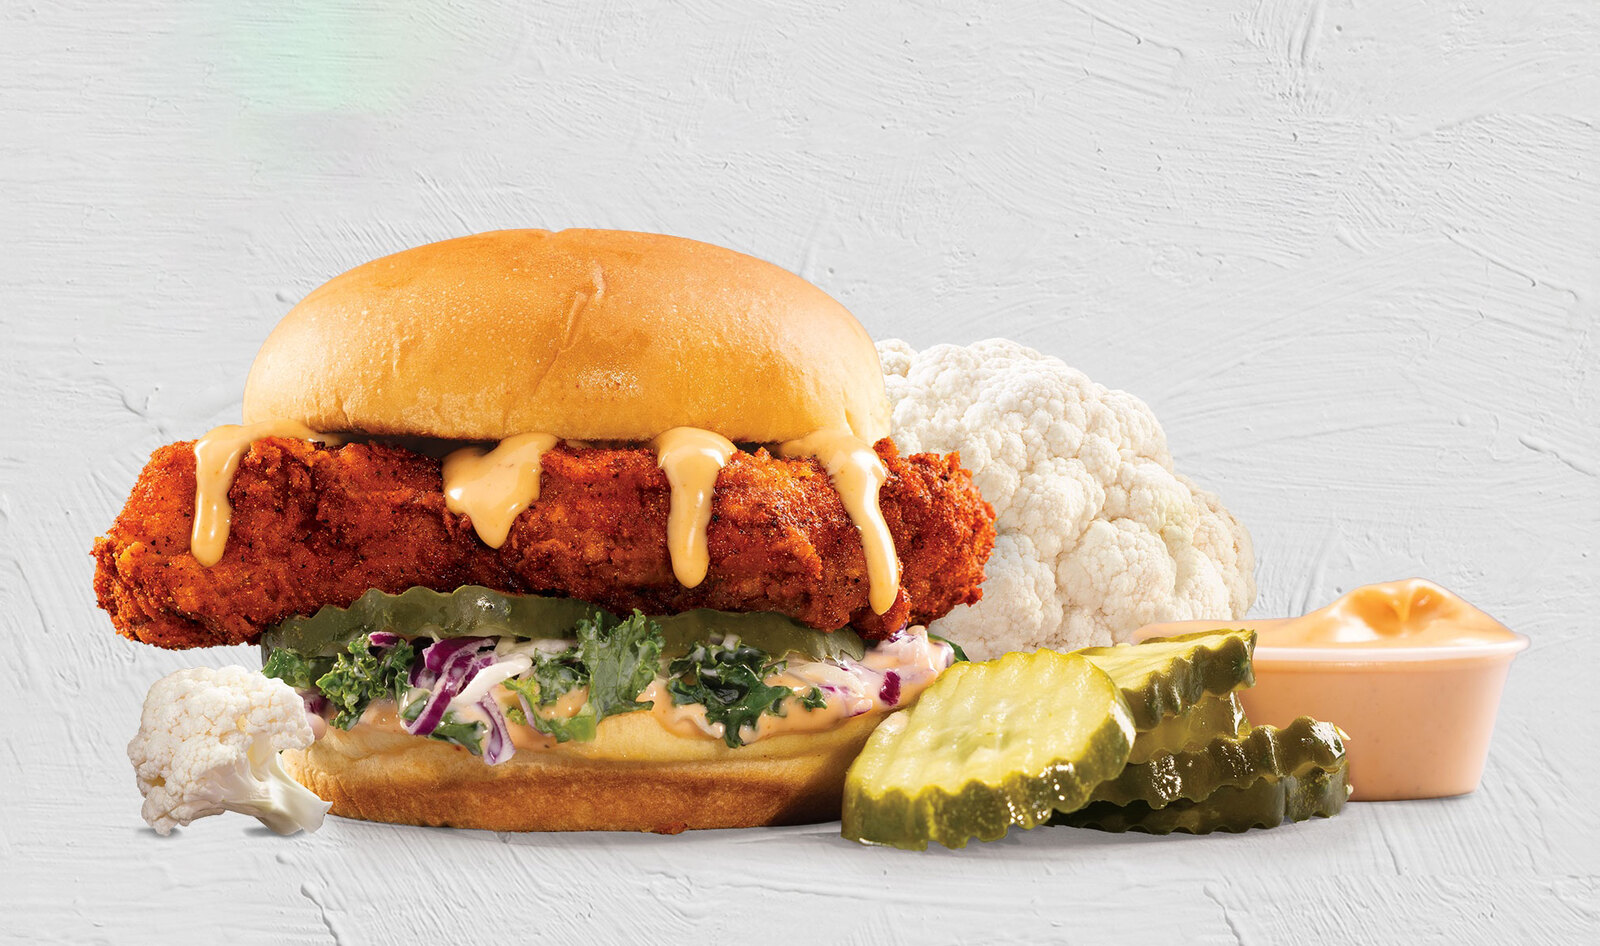 Dave’s Hot Chicken Follows Chick-fil-A’s Lead With New Meatless Sandwich